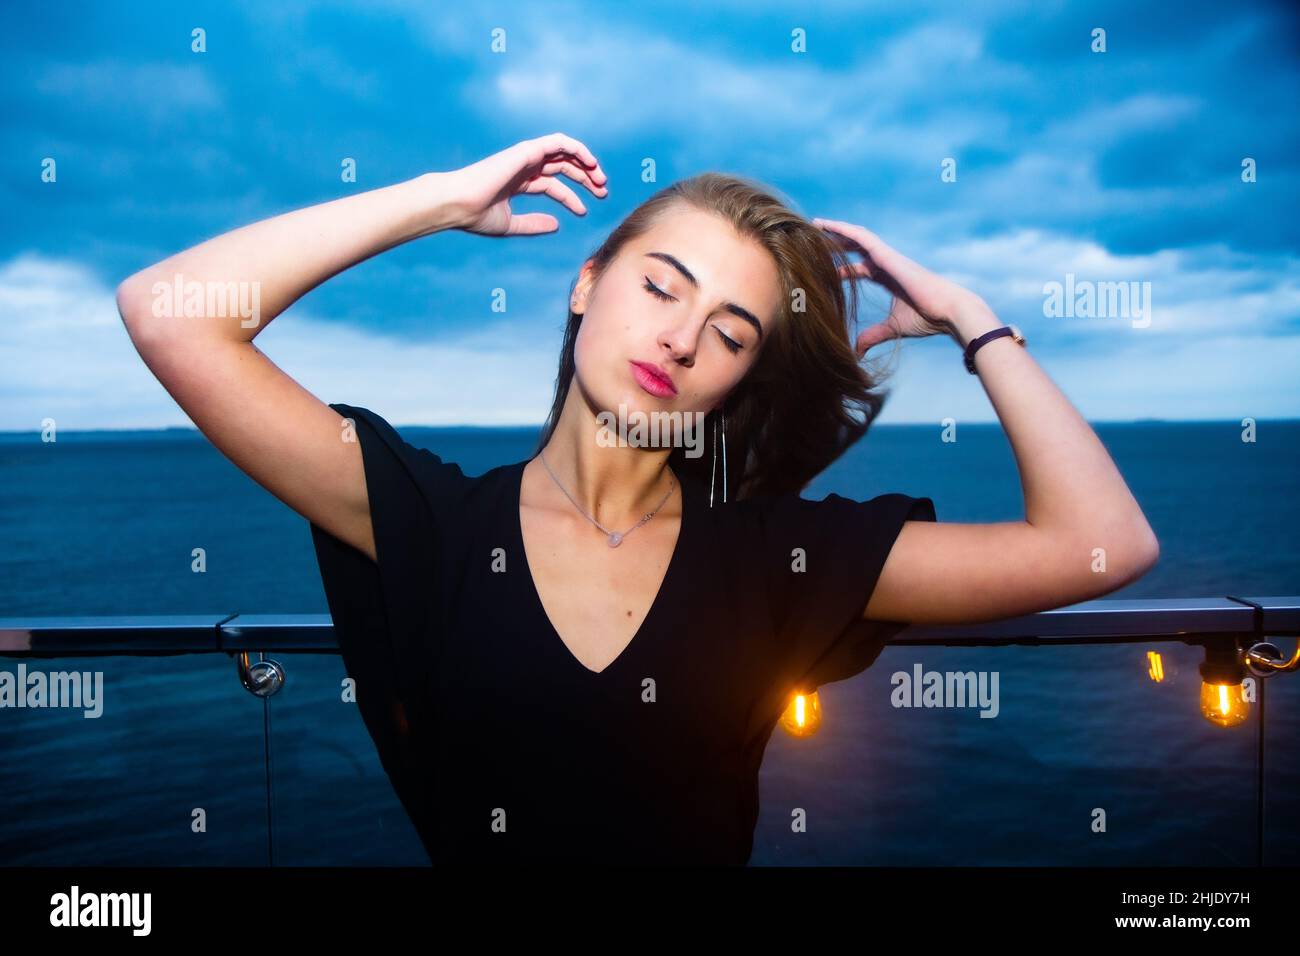 Young Ukrainian lady enjoys her time in a night club in Odessa on the shore of the Black Sea in romantic mood. A drama sky adds contrast to her image. Stock Photo